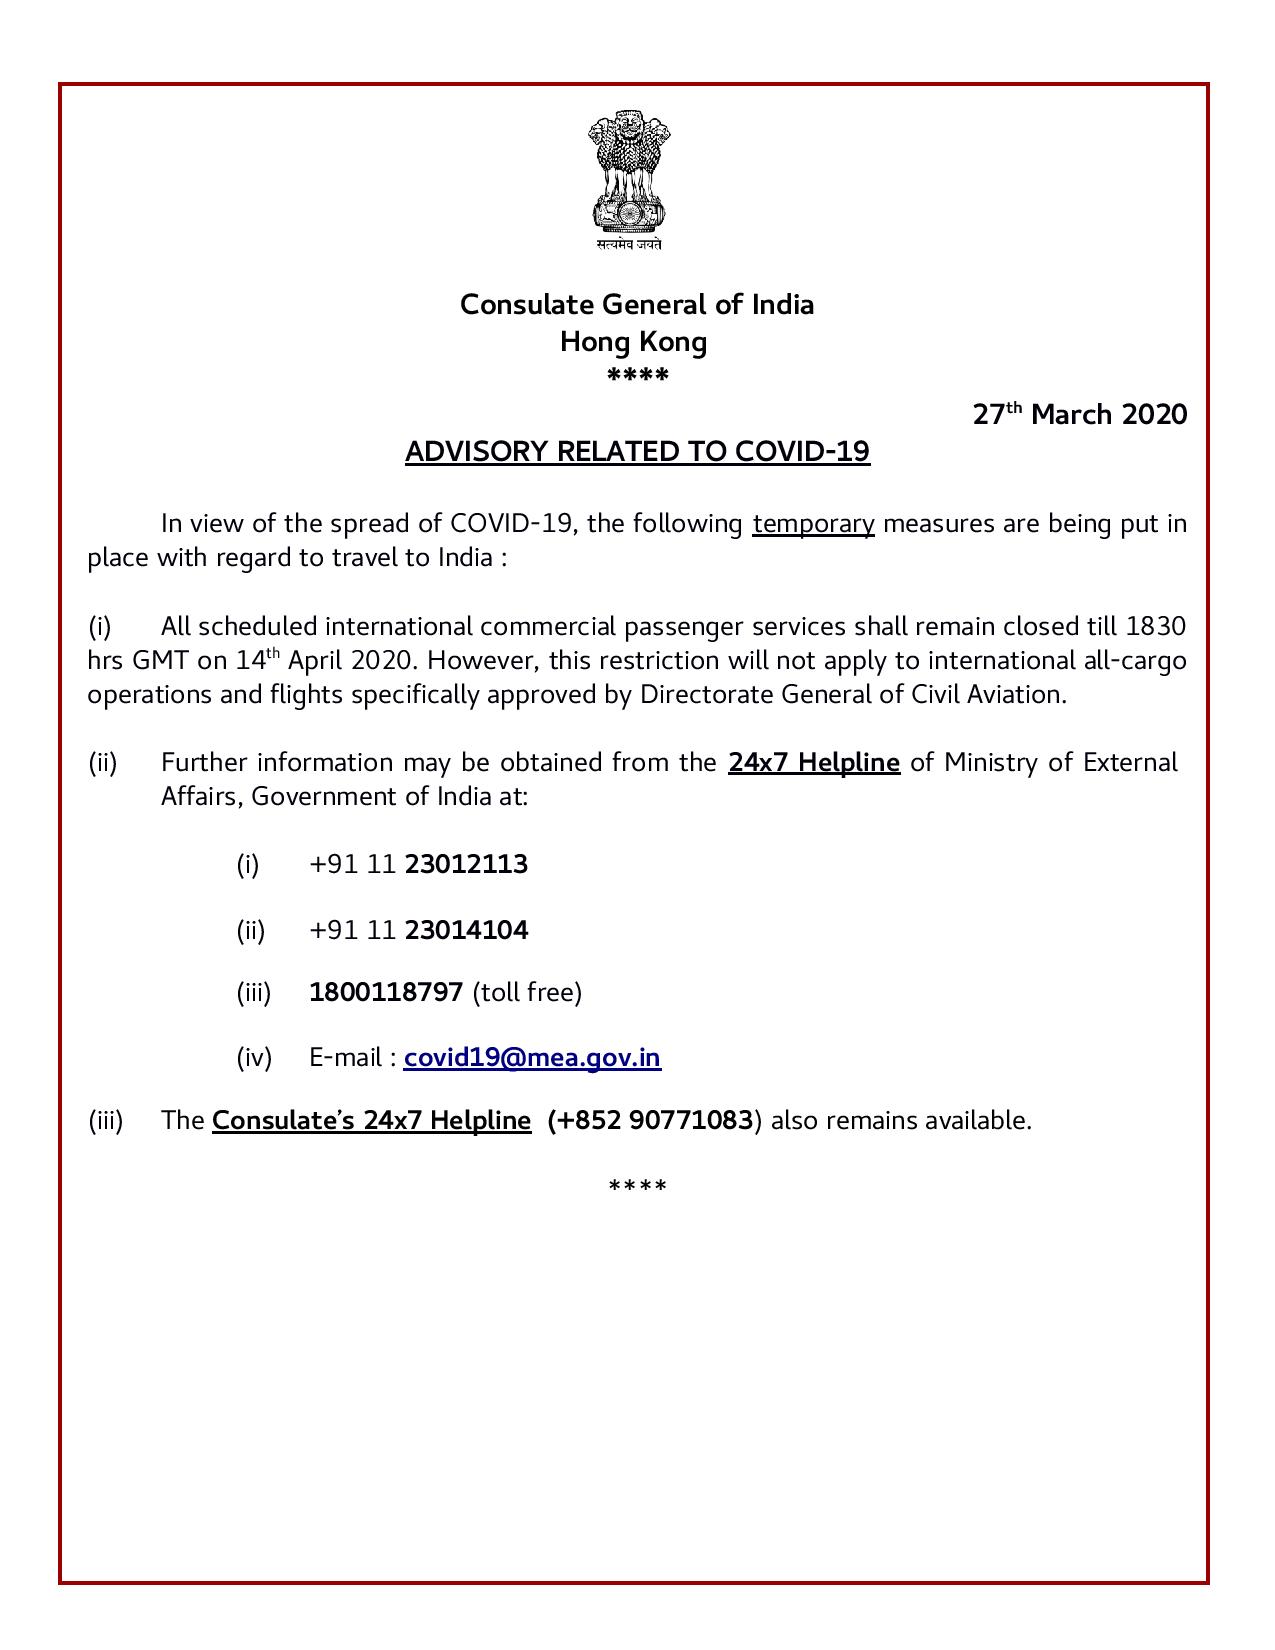 Advisory with regard to travel to India: All scheduled international commercial passenger services shall remain closed till 14th April 2020